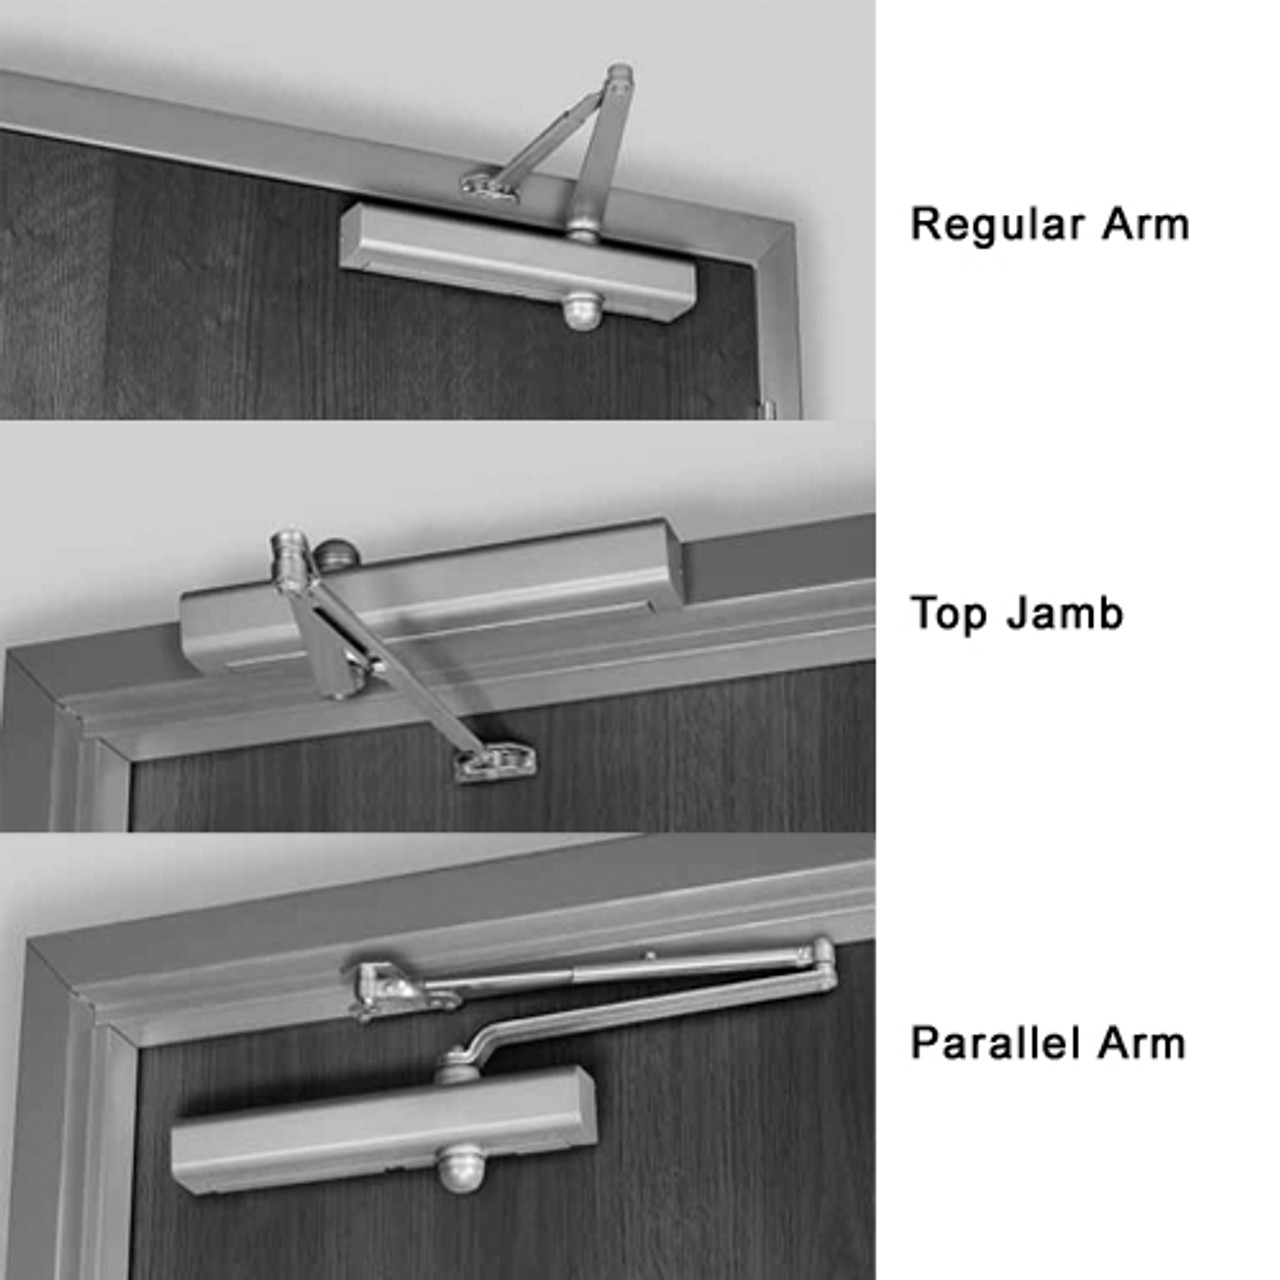 8101H-689 Norton 8000 Series Hold Open Door Closers with Regular Parallel and Top Jamb to 3 inch Reveal in Aluminum Finish